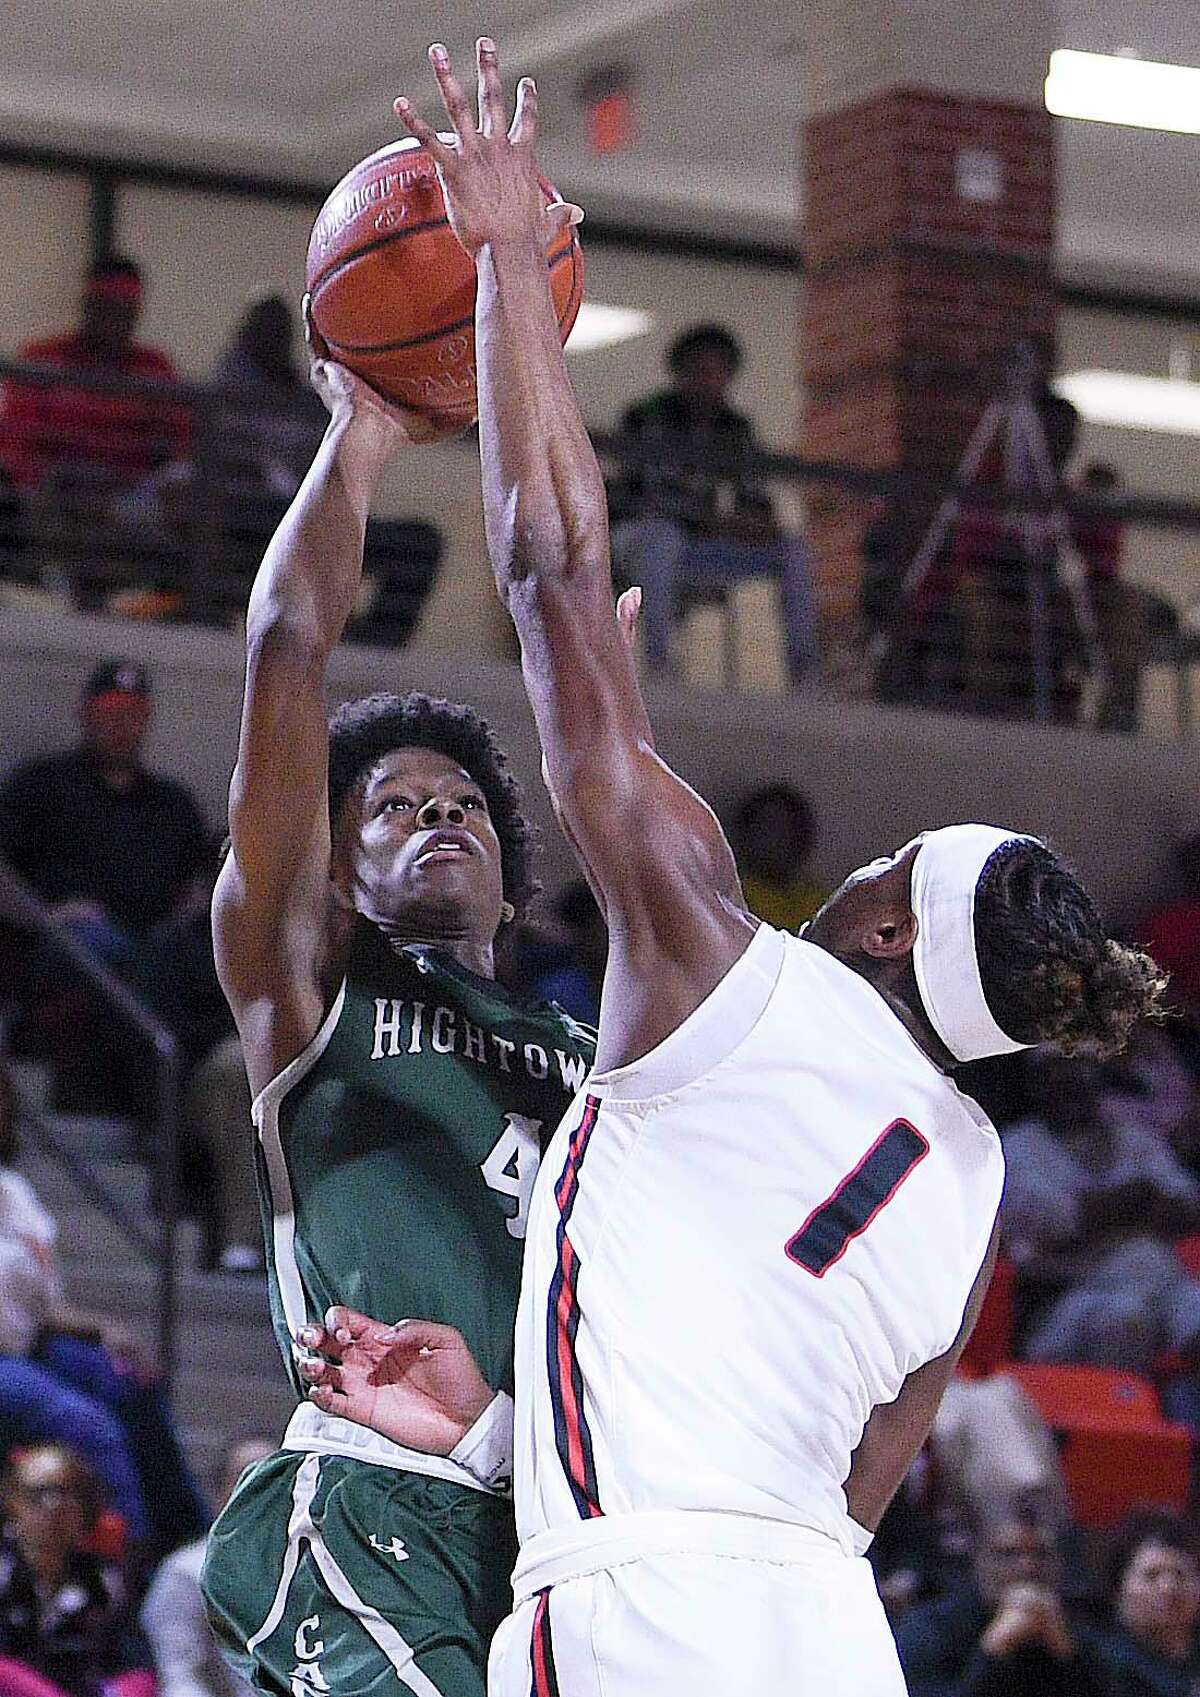 Hightower guard Ja'cory Chatman, left, shoots as Port Arthur Memorial guard Amaree Abram defends during the first half of a high school basketball playoff game, Friday, Feb. 28, 2020, in La Porte, TX.